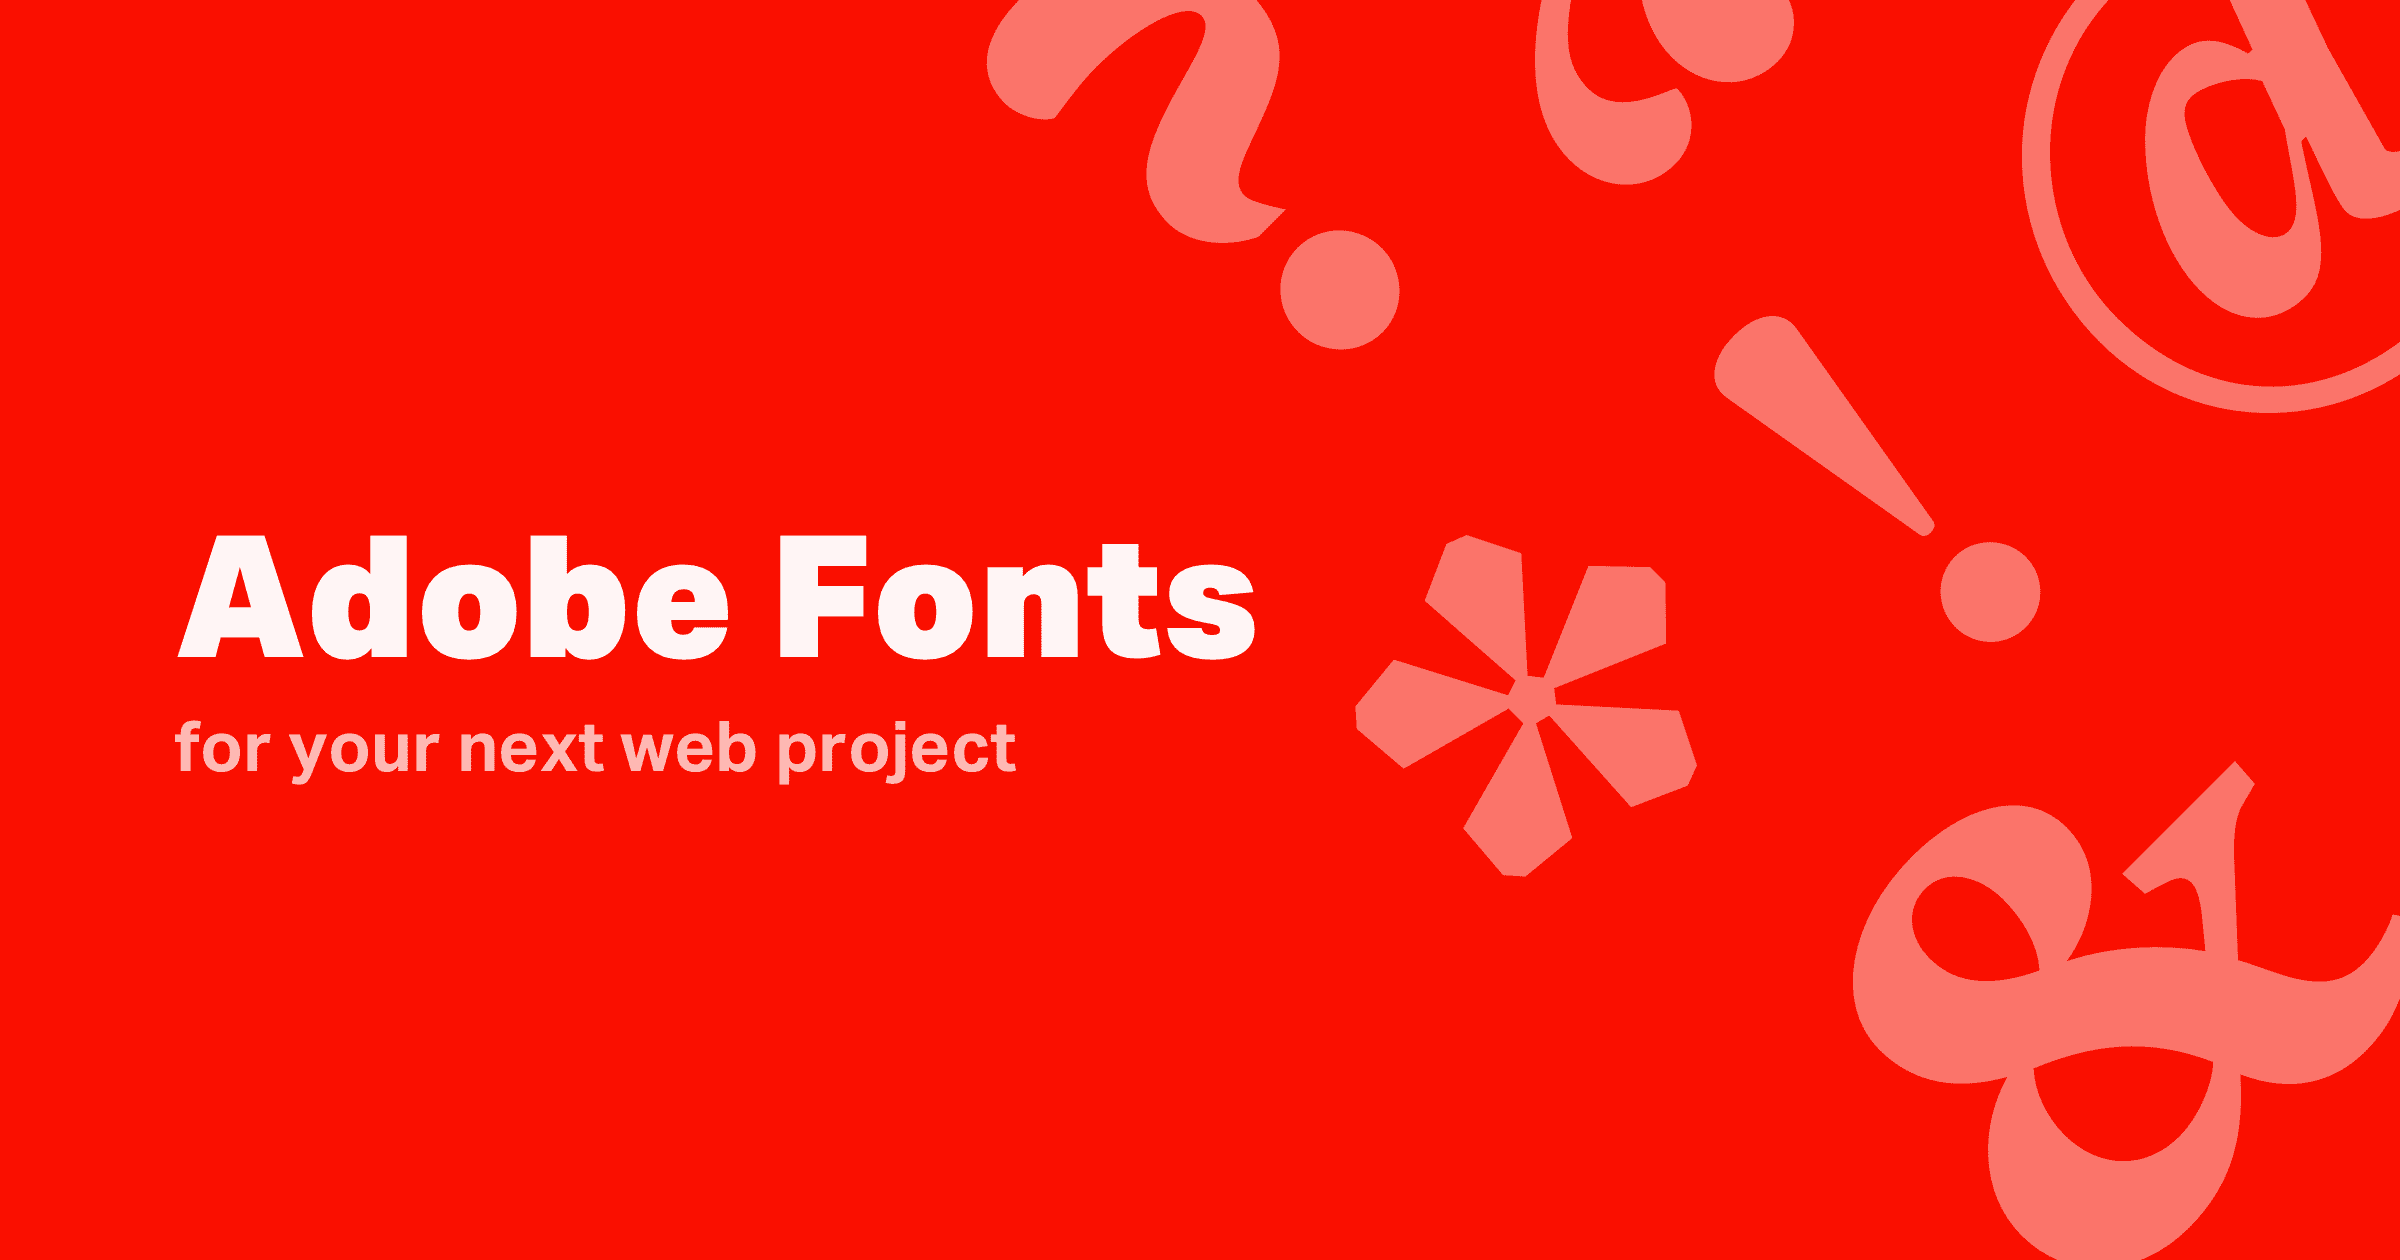 Adobe Fonts to use for your next web project